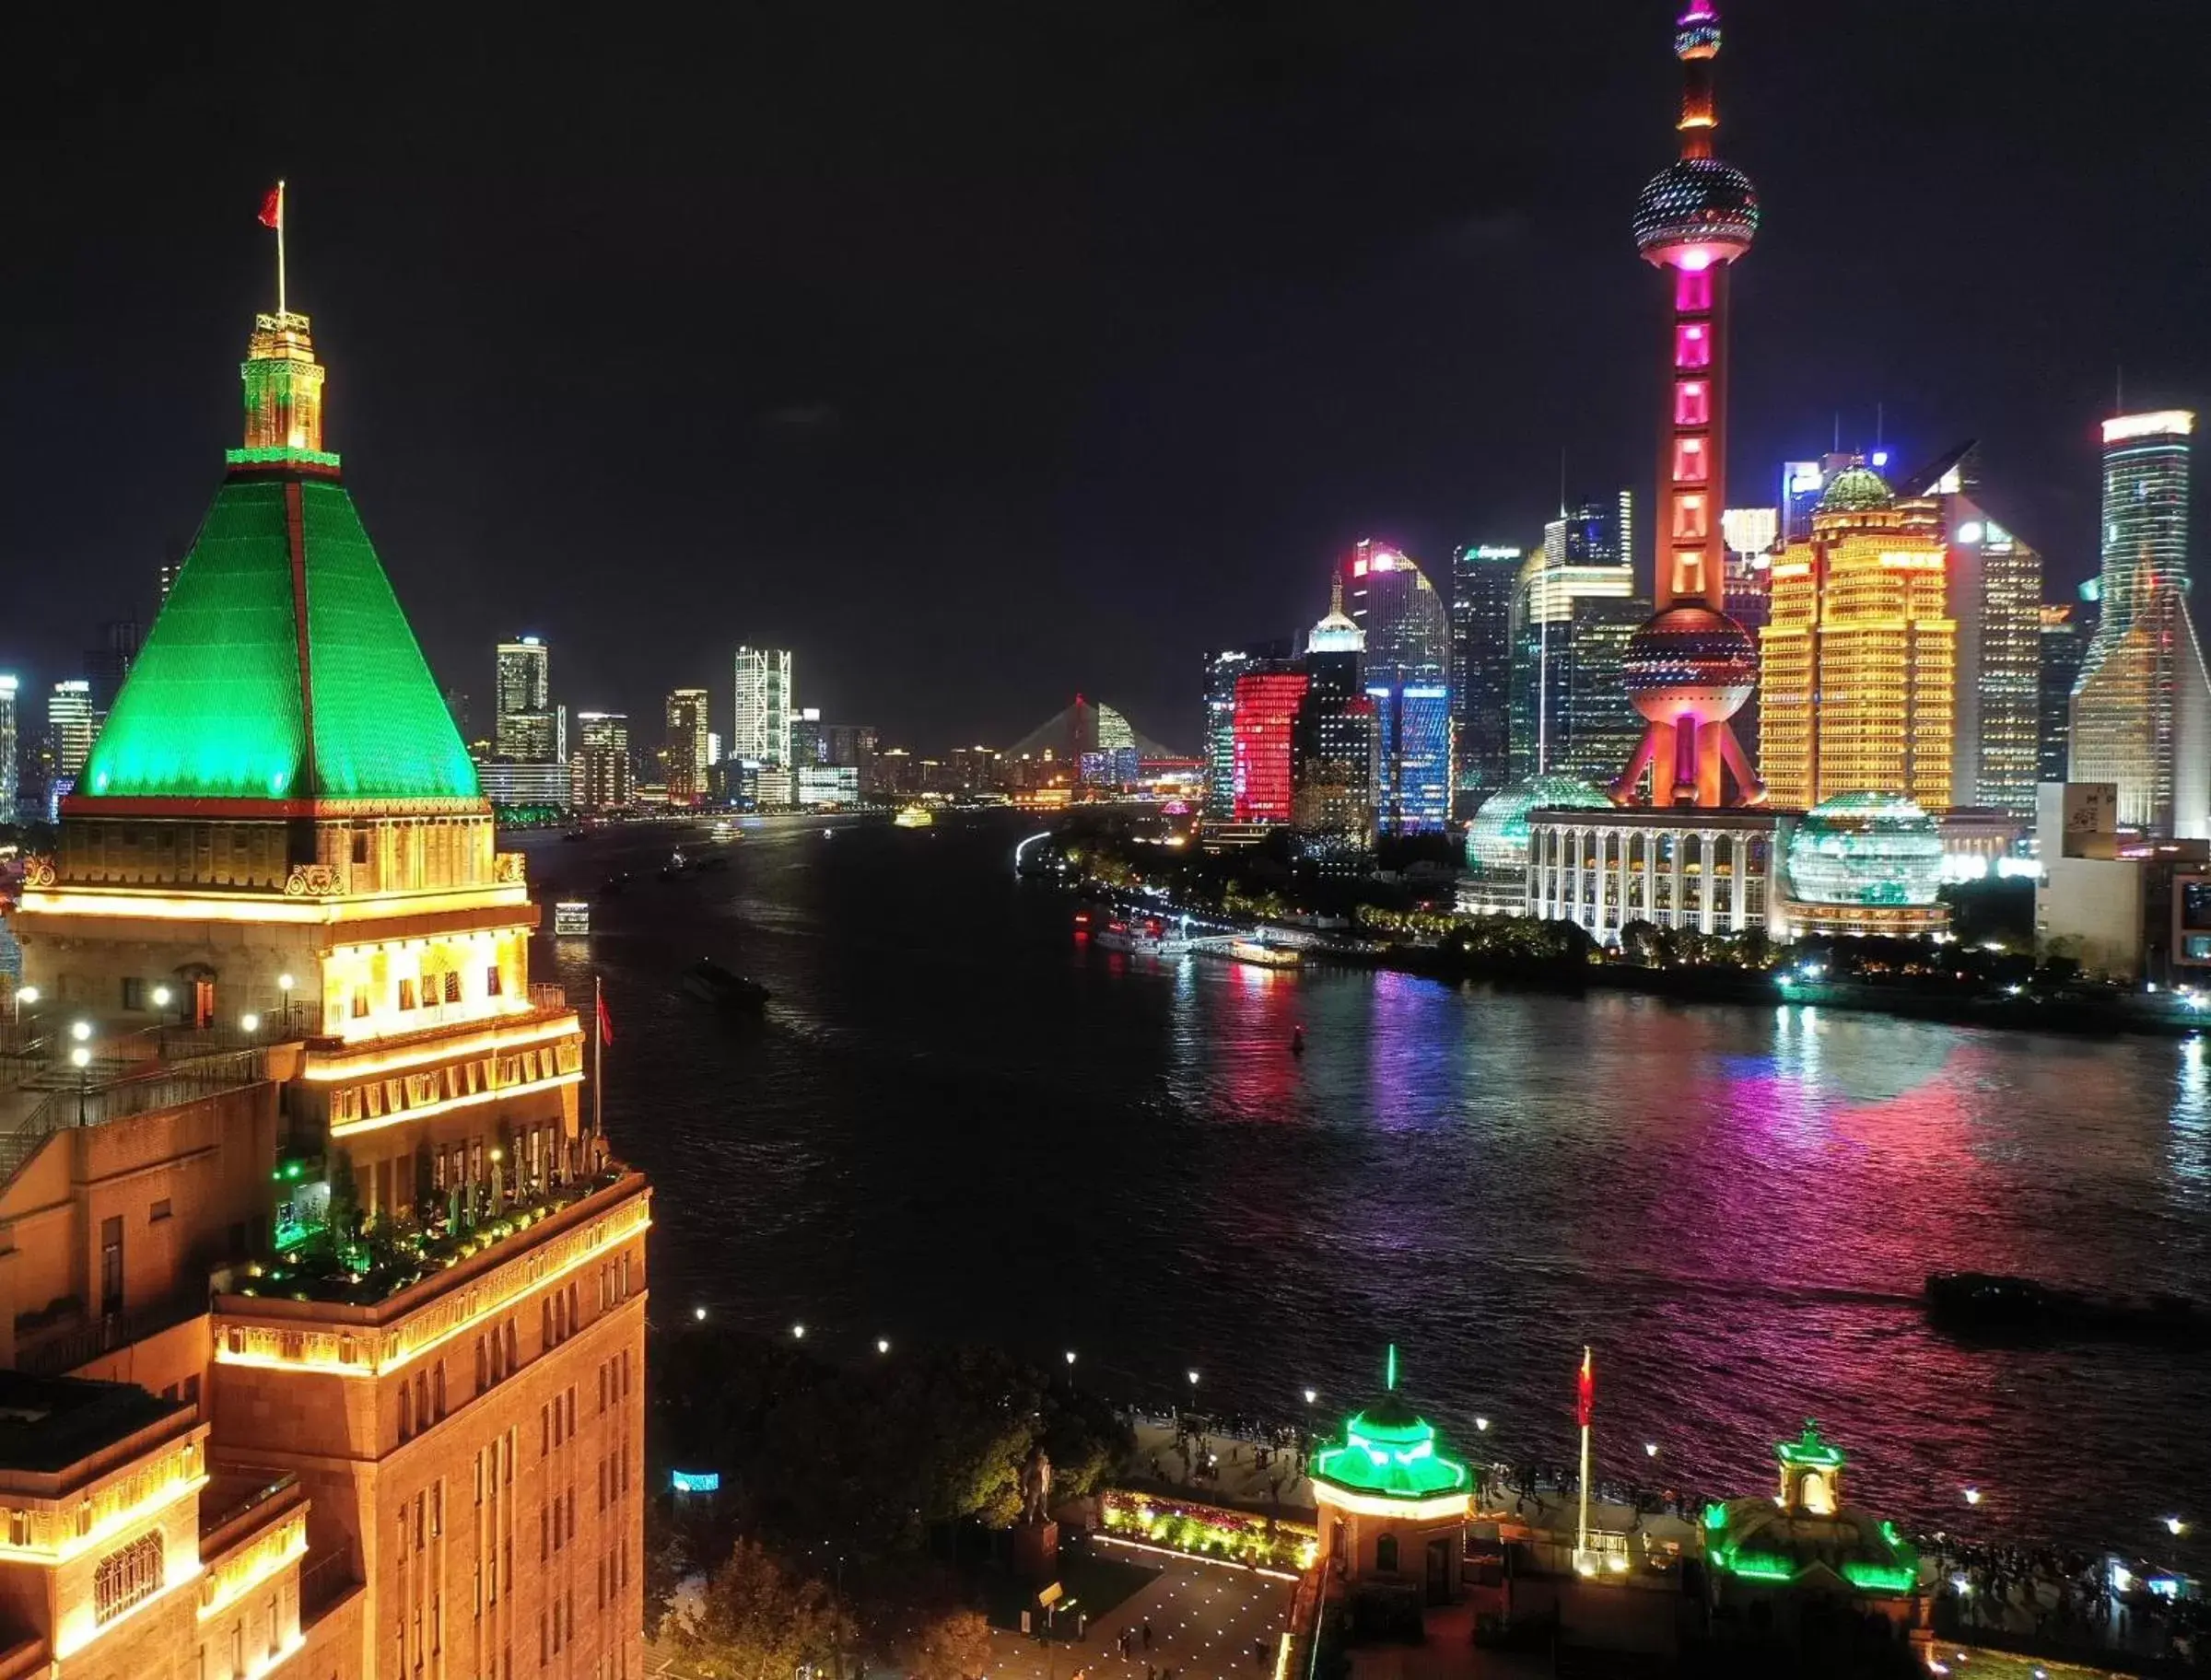 Nearby landmark in Fairmont Peace Hotel On the Bund (Start your own story with the BUND)